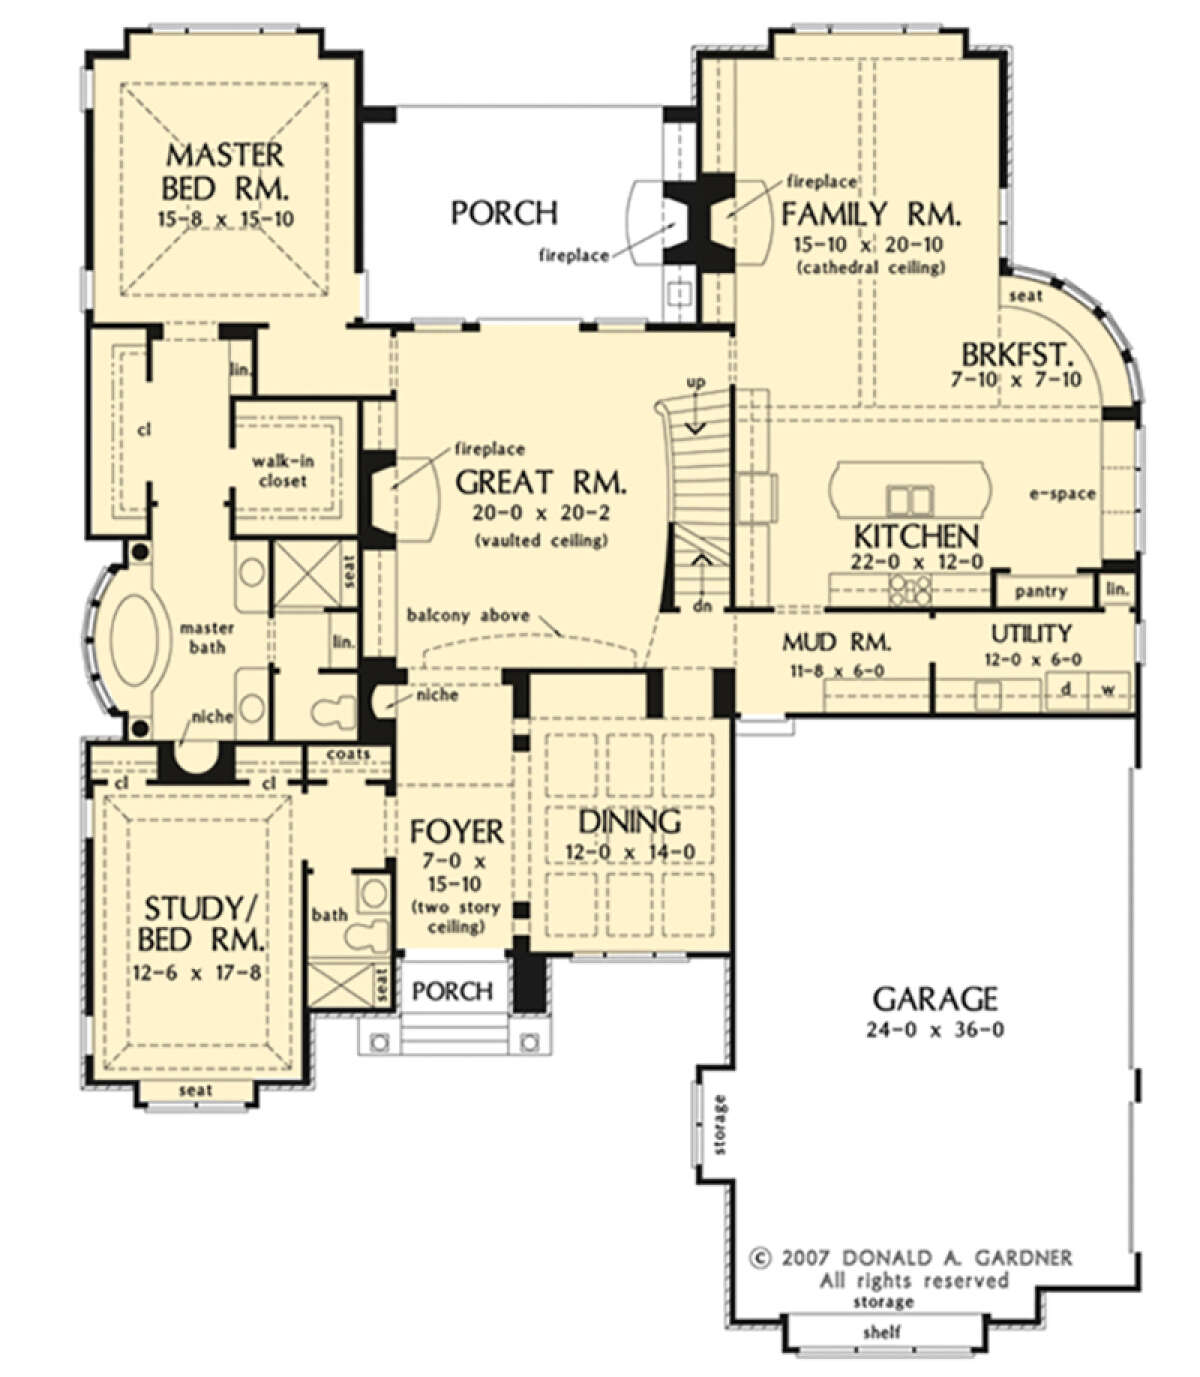 Main Floor w/ Basement Stair Location for House Plan #2865-00341